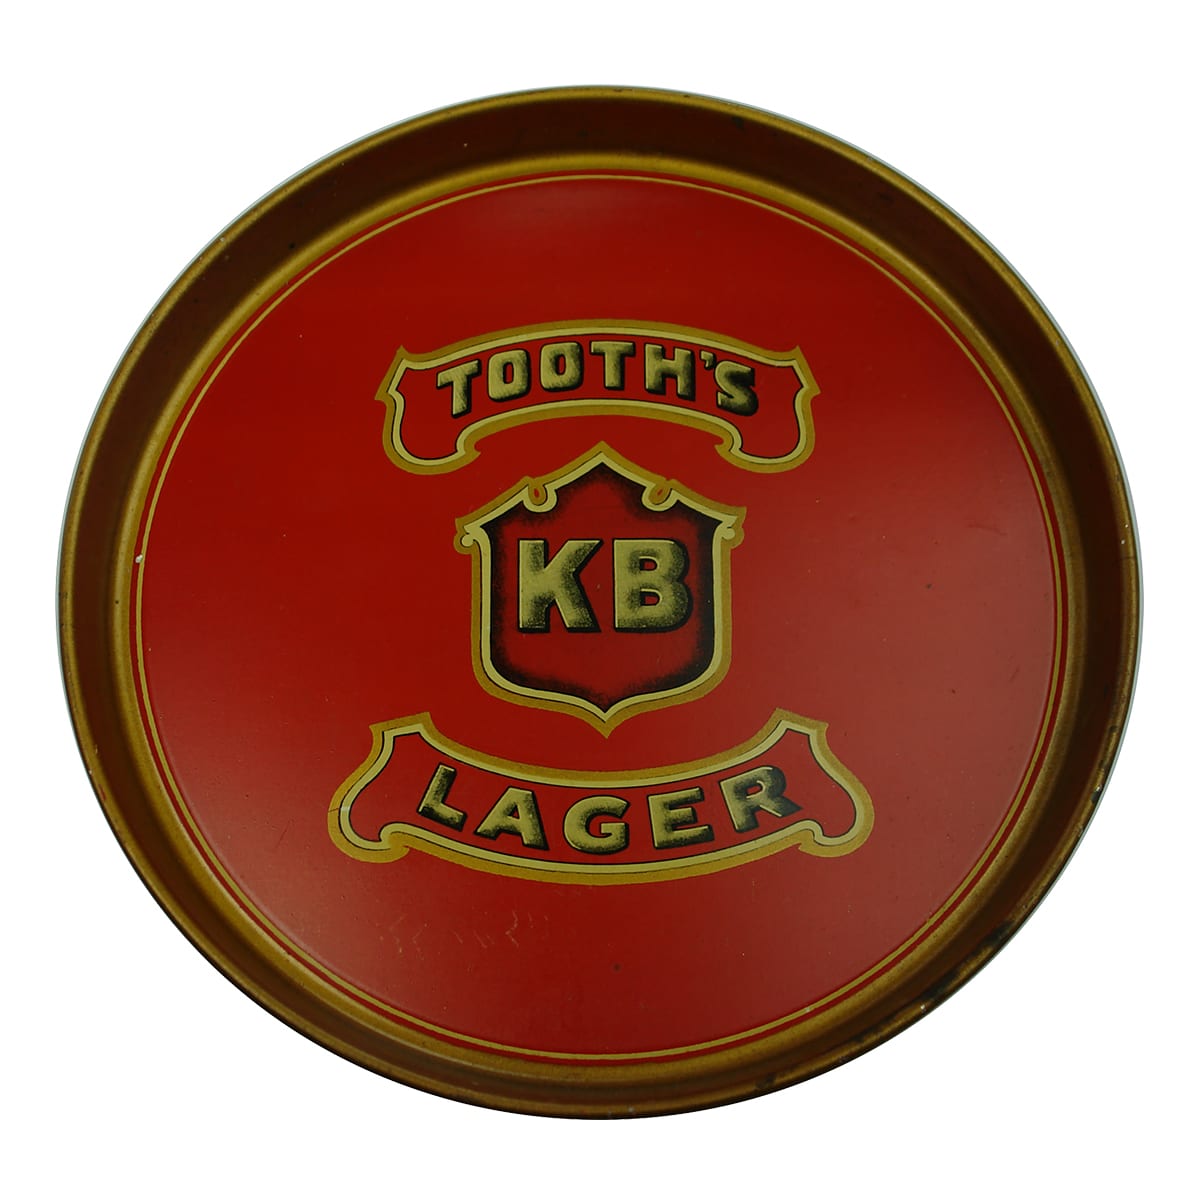 Advertising Serving Tray. Tooth's KB Lager. (Sydney, New South Wales)